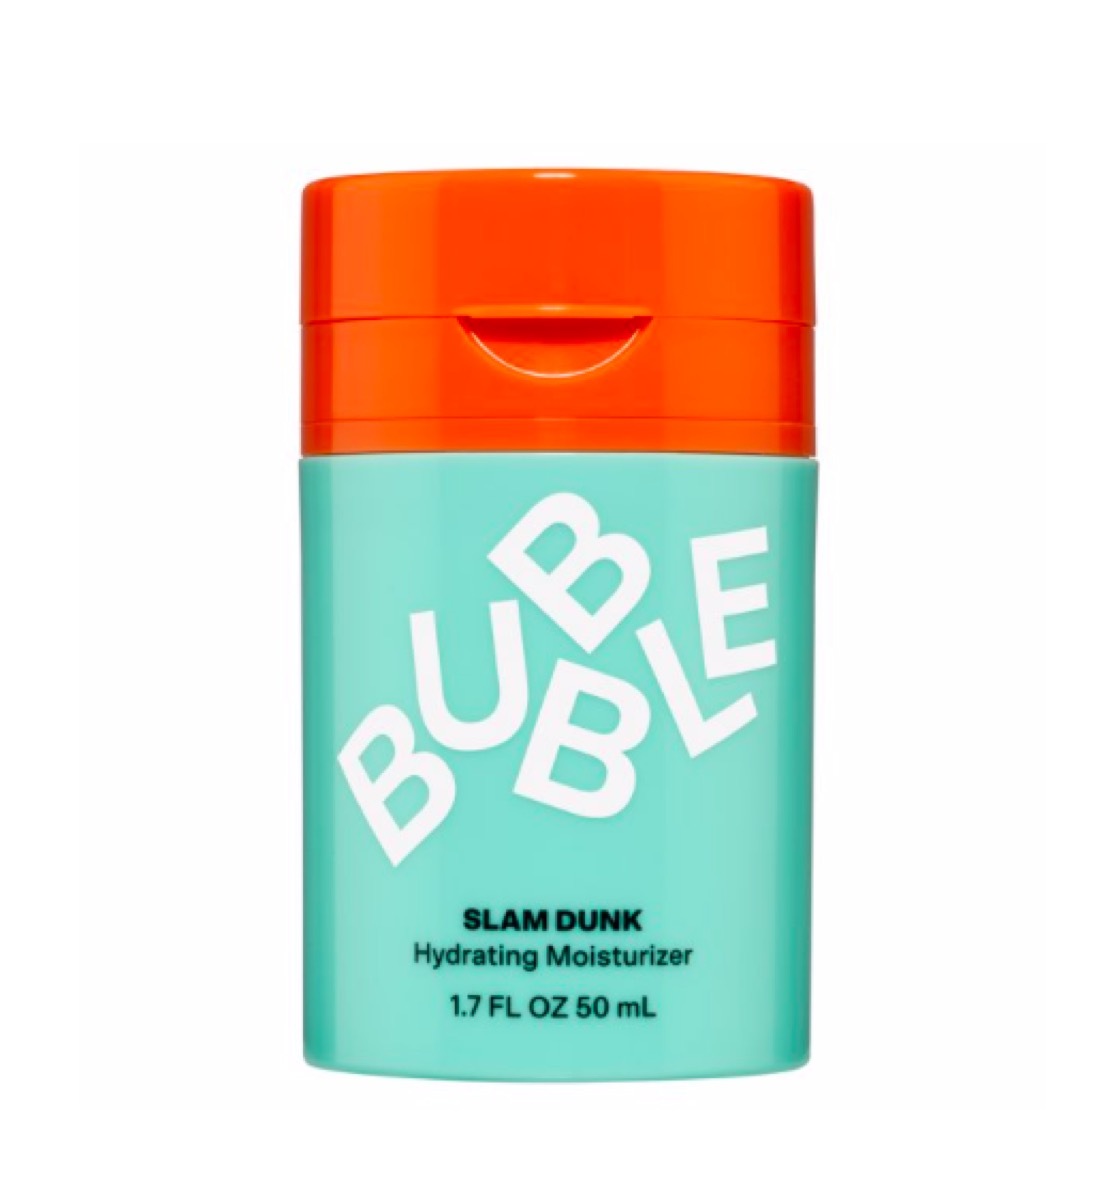 bubble skincare moisturizer being sold at Walmart